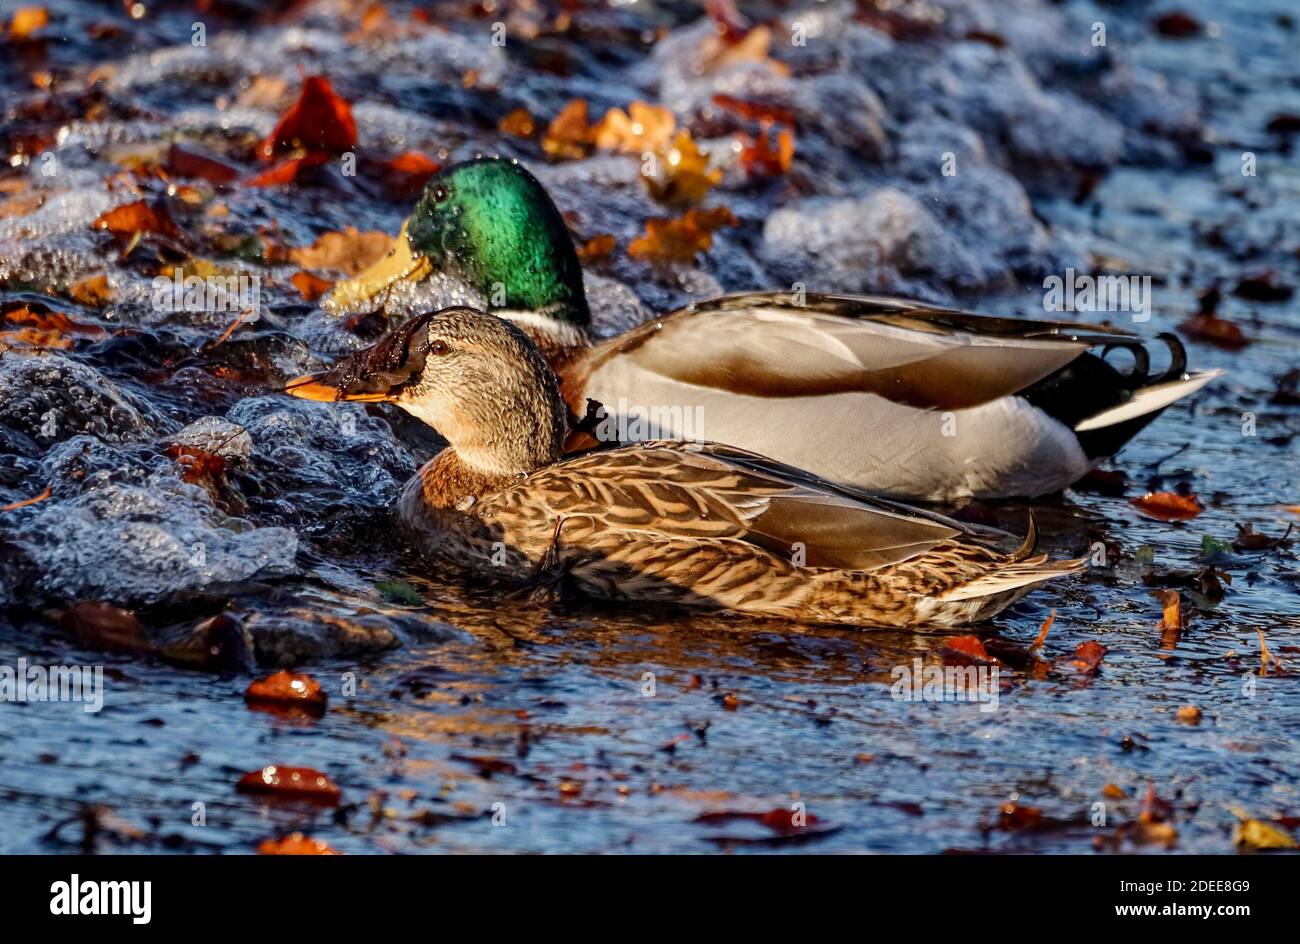 The pair of ducks struggled through leaf-covered lake water. A large leaf caught on the duck's beak and looked like a mask. Stock Photo